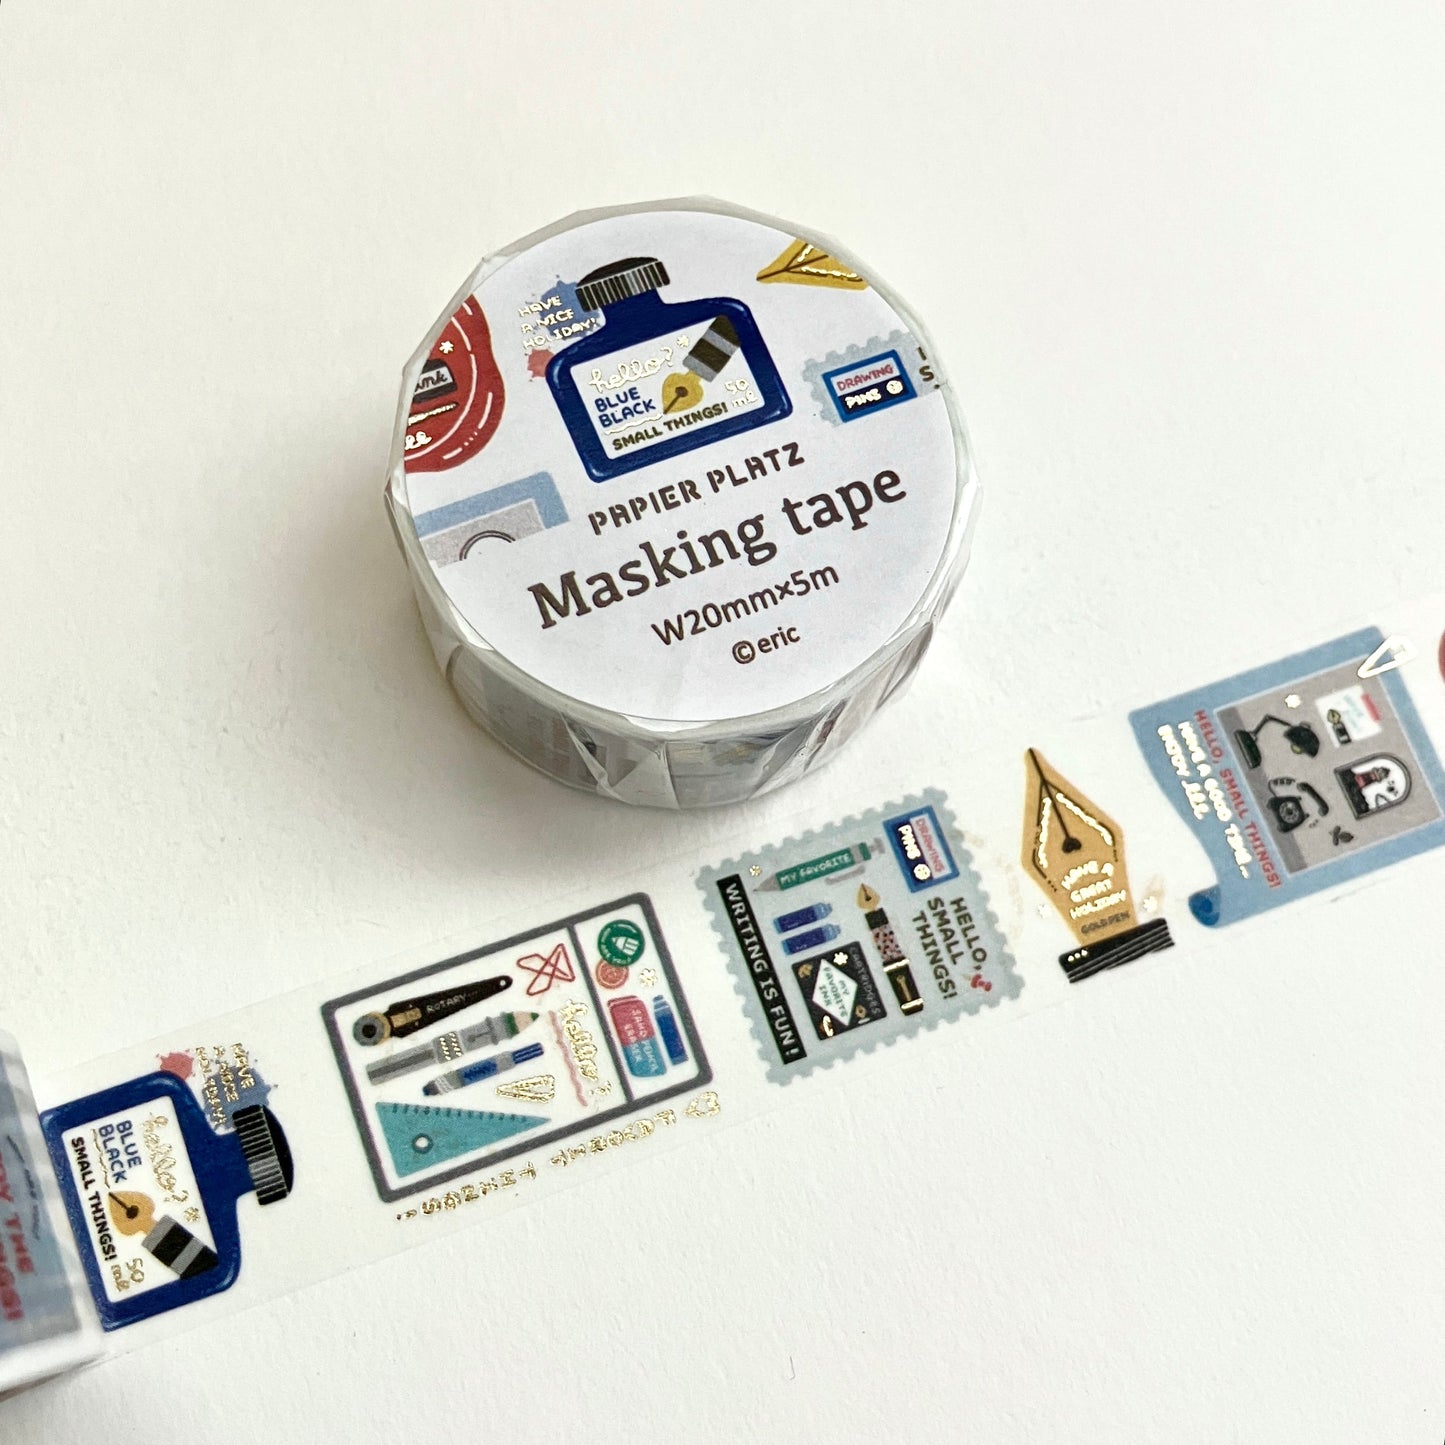 eric small things Gold Foil Washi Tape